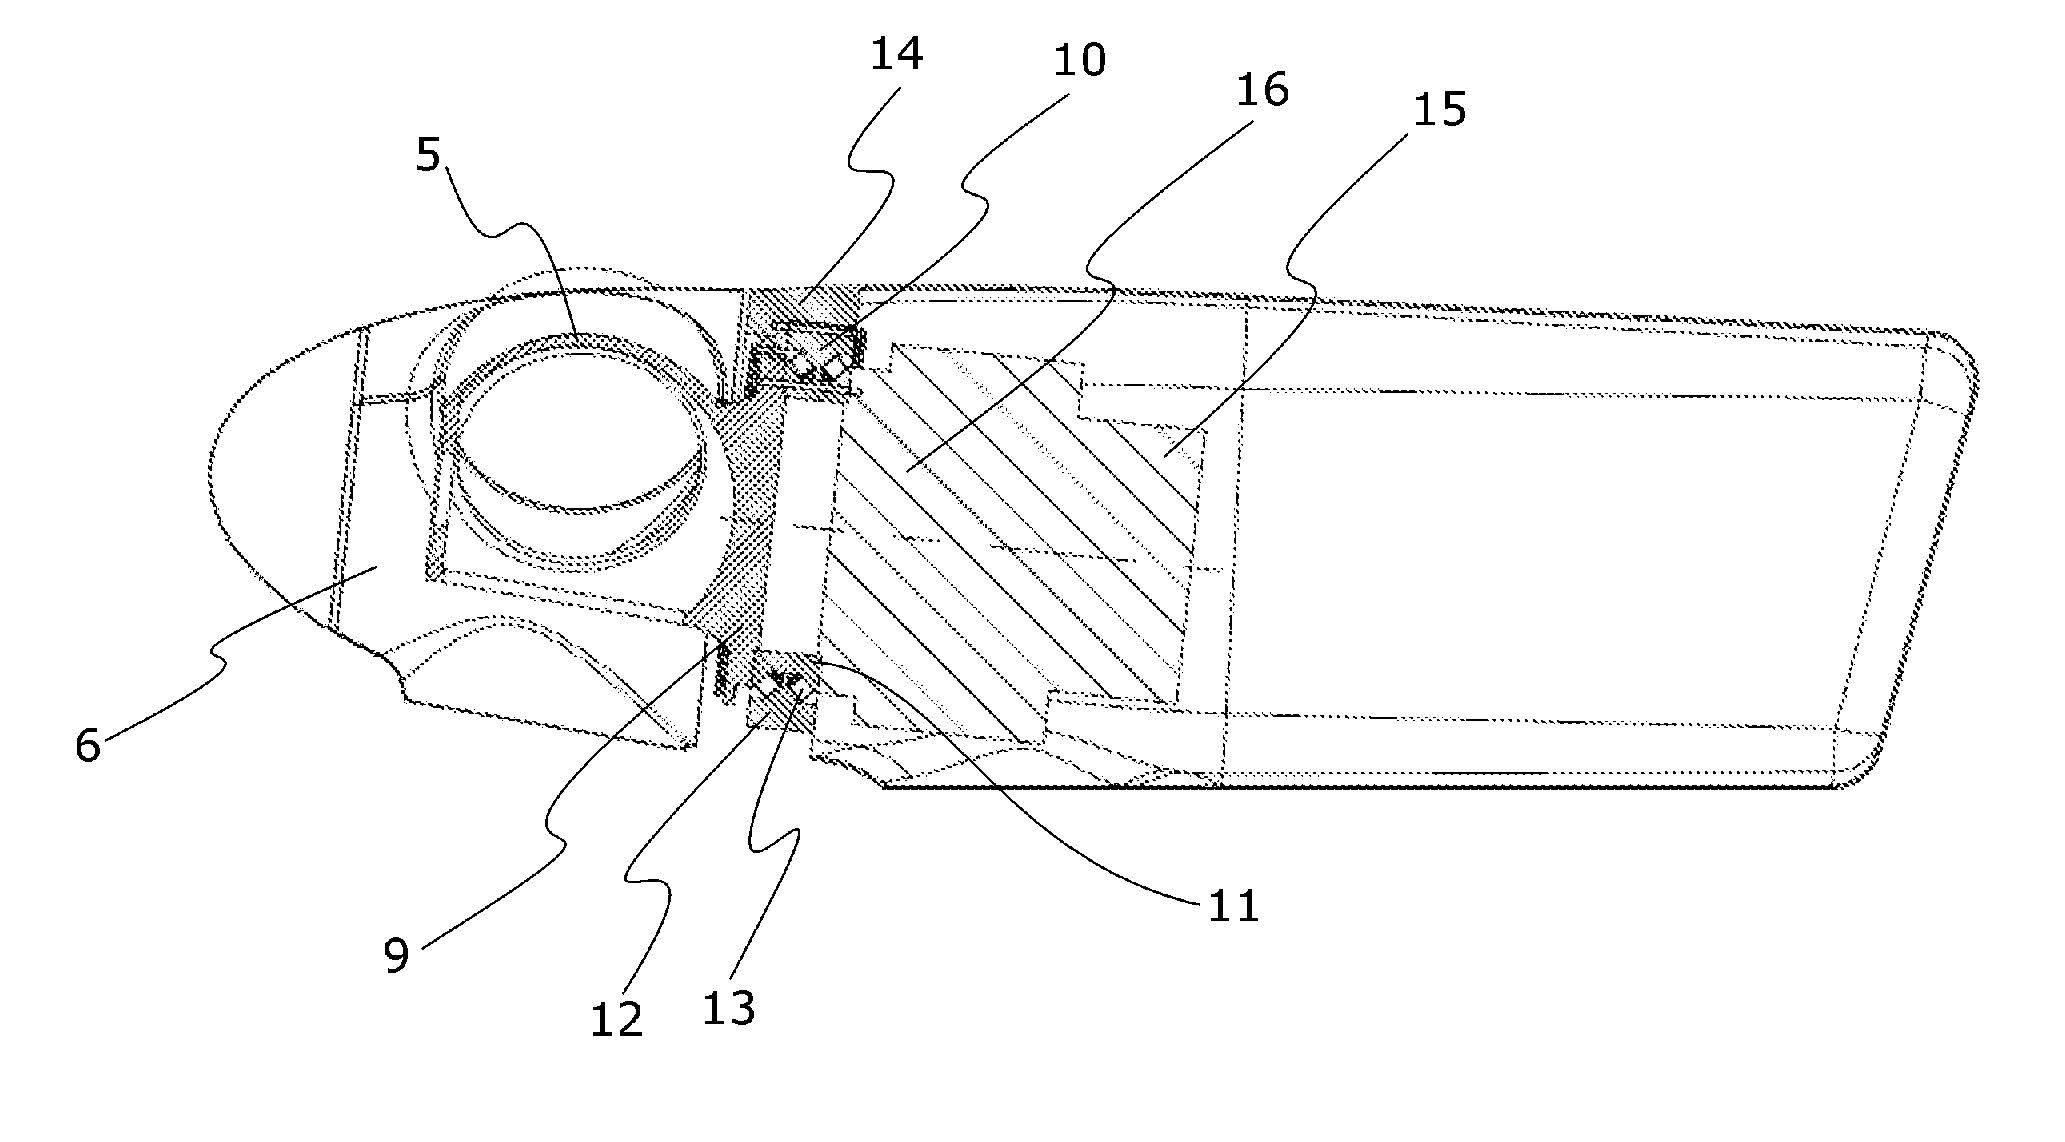 Method for installing a wind turbine, a nacelle for a wind turbine, and method for transporting elements of a wind turbine